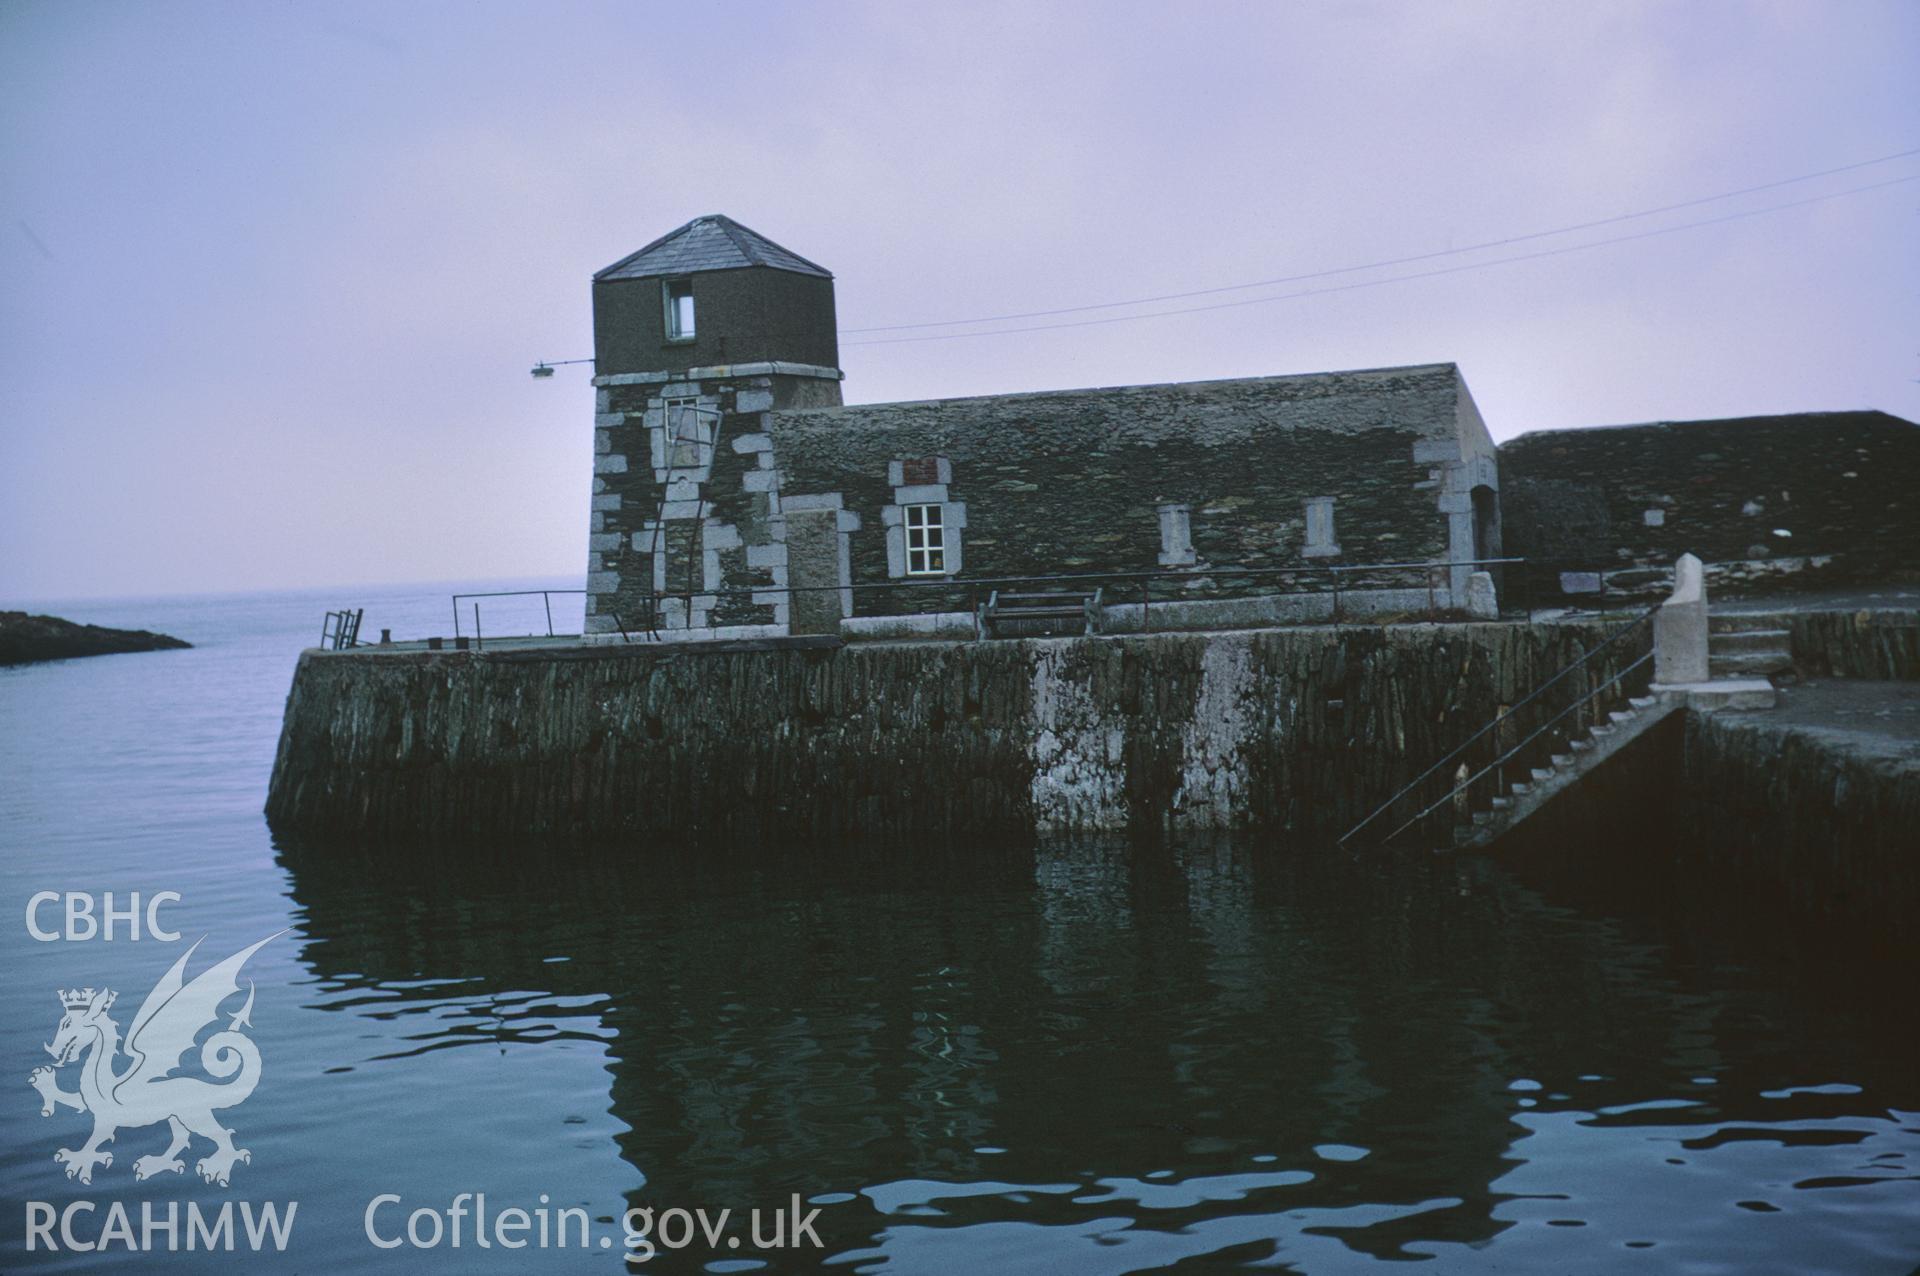 35mm colour slide showing Light House at Amlwch Harbour, Angelsey by Dylan Roberts.